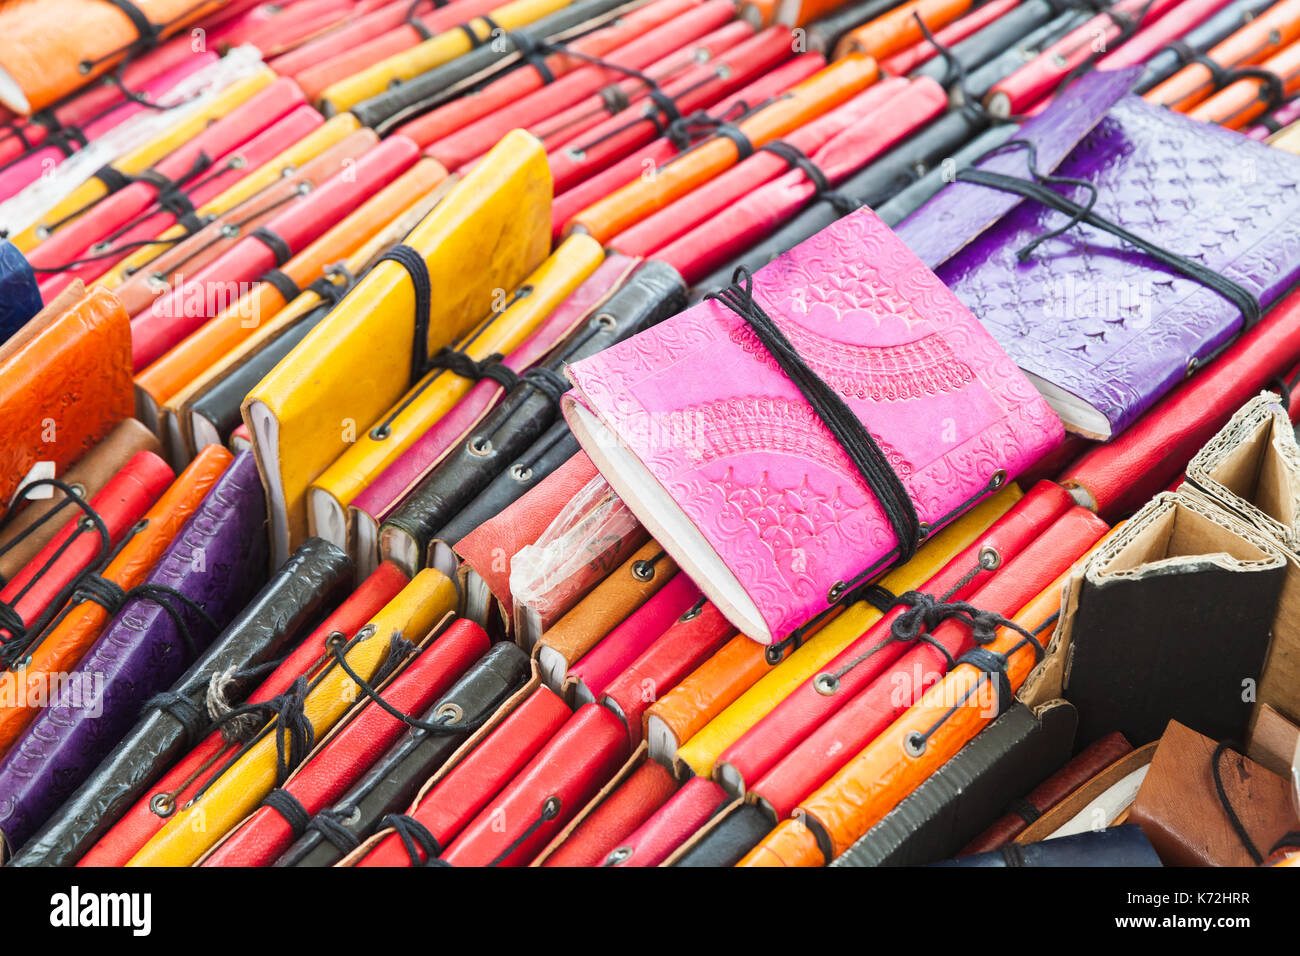 Amsterdam, Netherlands - February 25, 2017: Assortment of small notebooks in colorful leather covers. Goods of market Noordermarkt Stock Photo